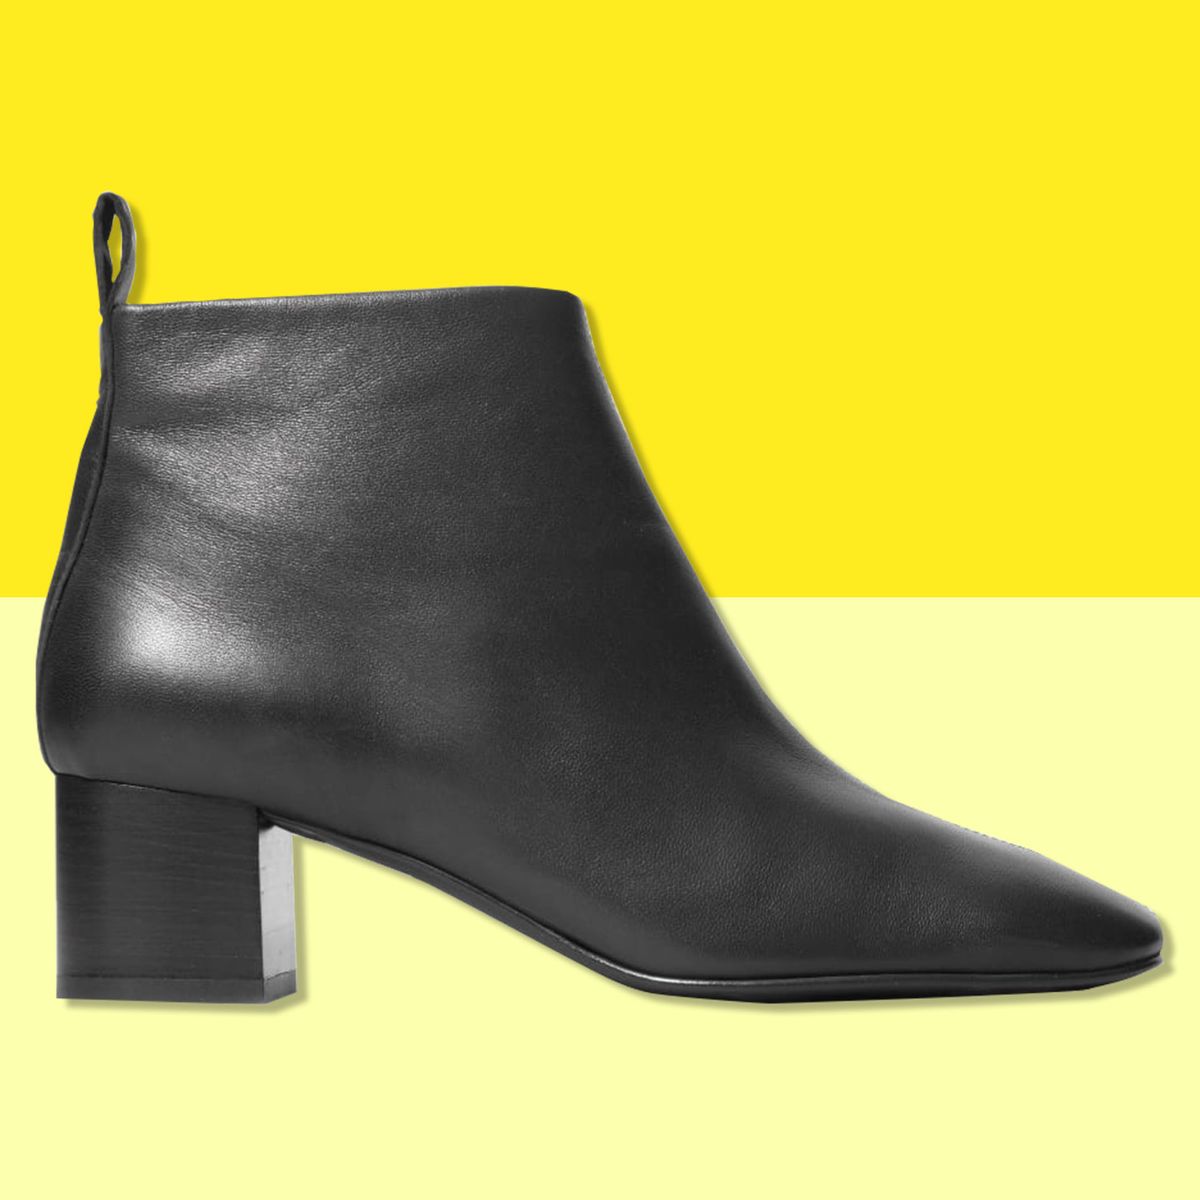 Everlane Day Boots on Sale 2019 | The 